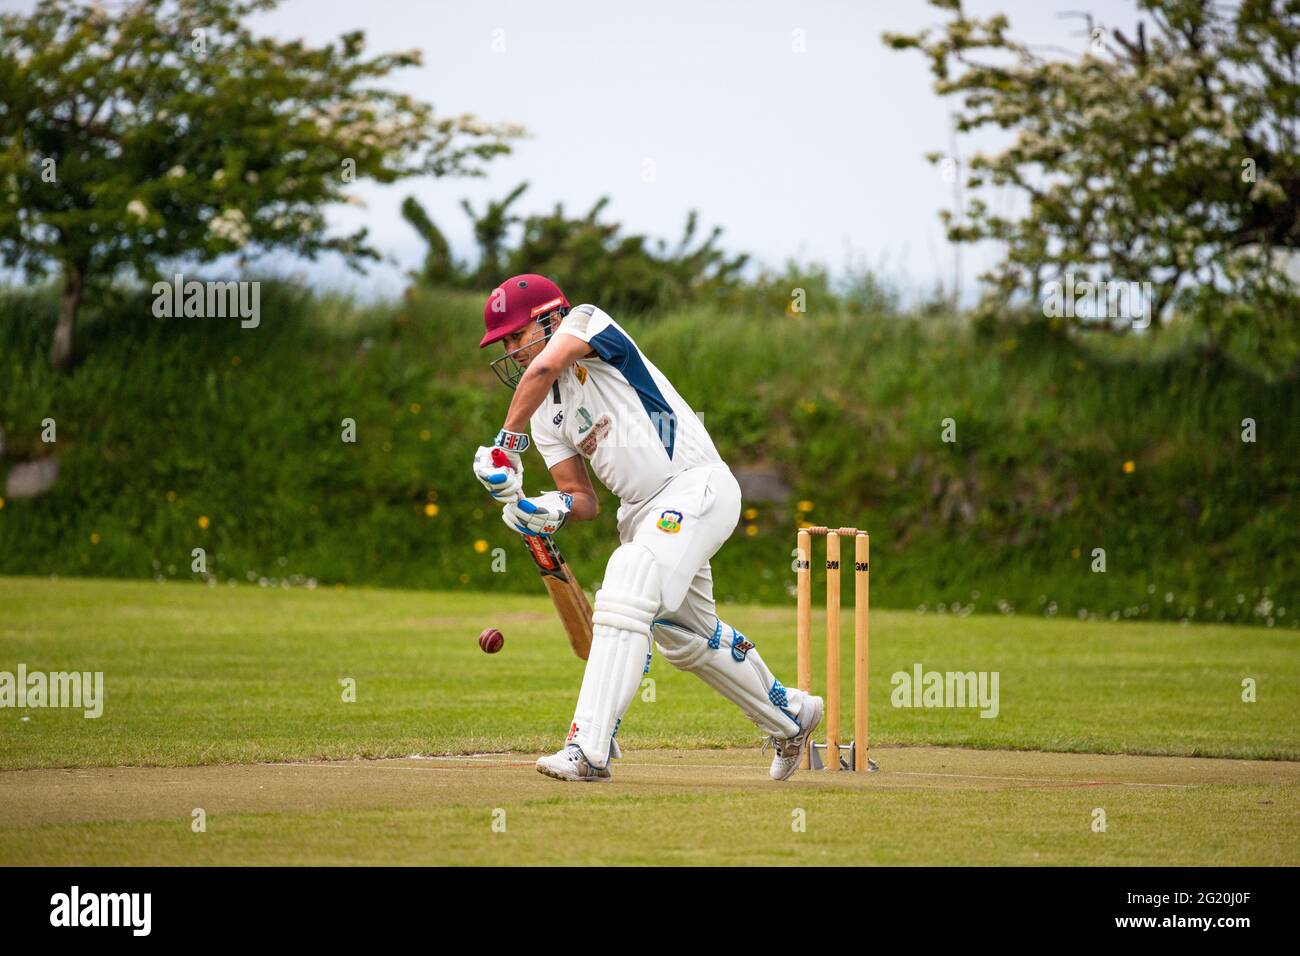 Farmers Cross, Cork, Ireland. 07th June, 2021. In their first match in a year and a half Harlequins 3 played Cork County 3 in a friendly warm up match before the season starts at Harlequin Park, Farmers Cross Cork. Picture shows Ritesh Sah defending his wicket. - Credit; David Creedon / Alamy Live News Stock Photo